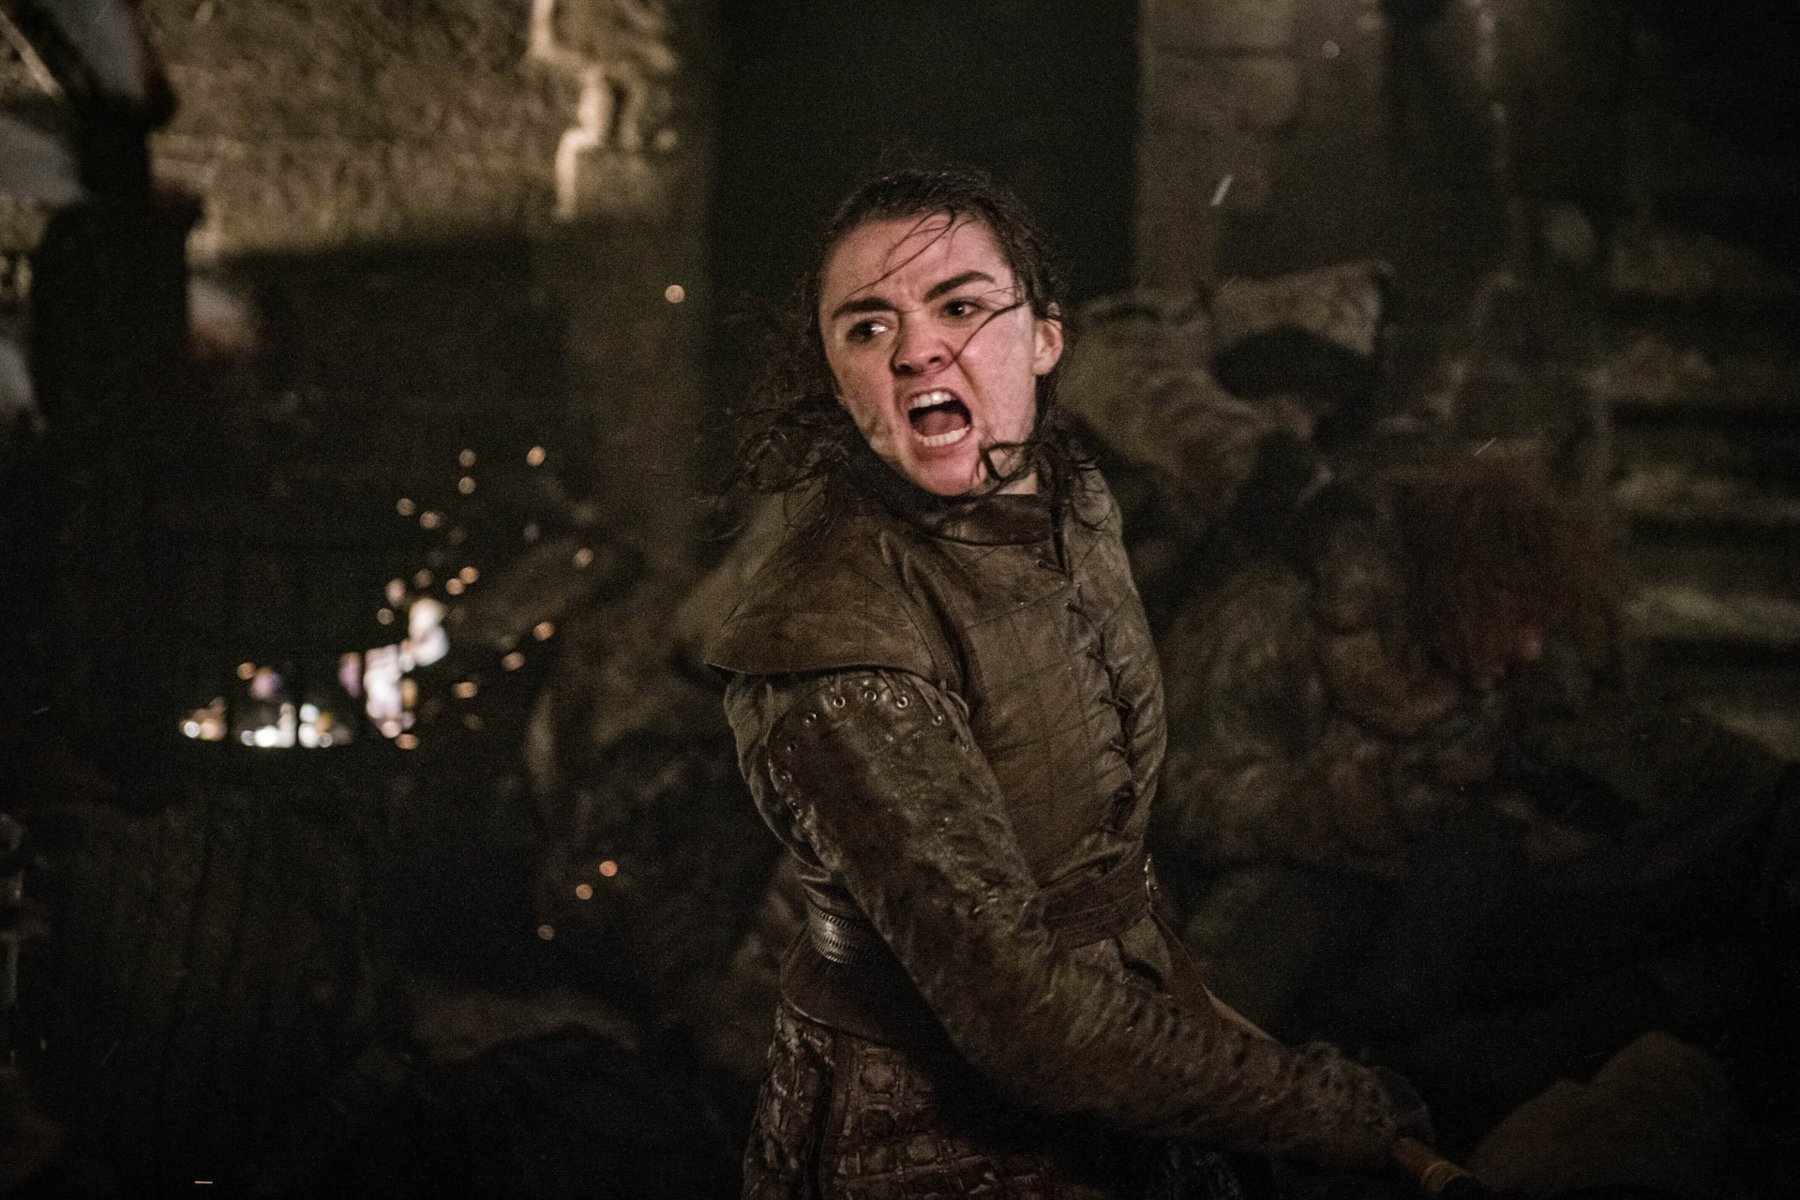 Maisie Williams as Arya Stark for our article on potential Game of Thrones spinoffs. She is fighting at the Battle of Winterfell and something is burning behind her.